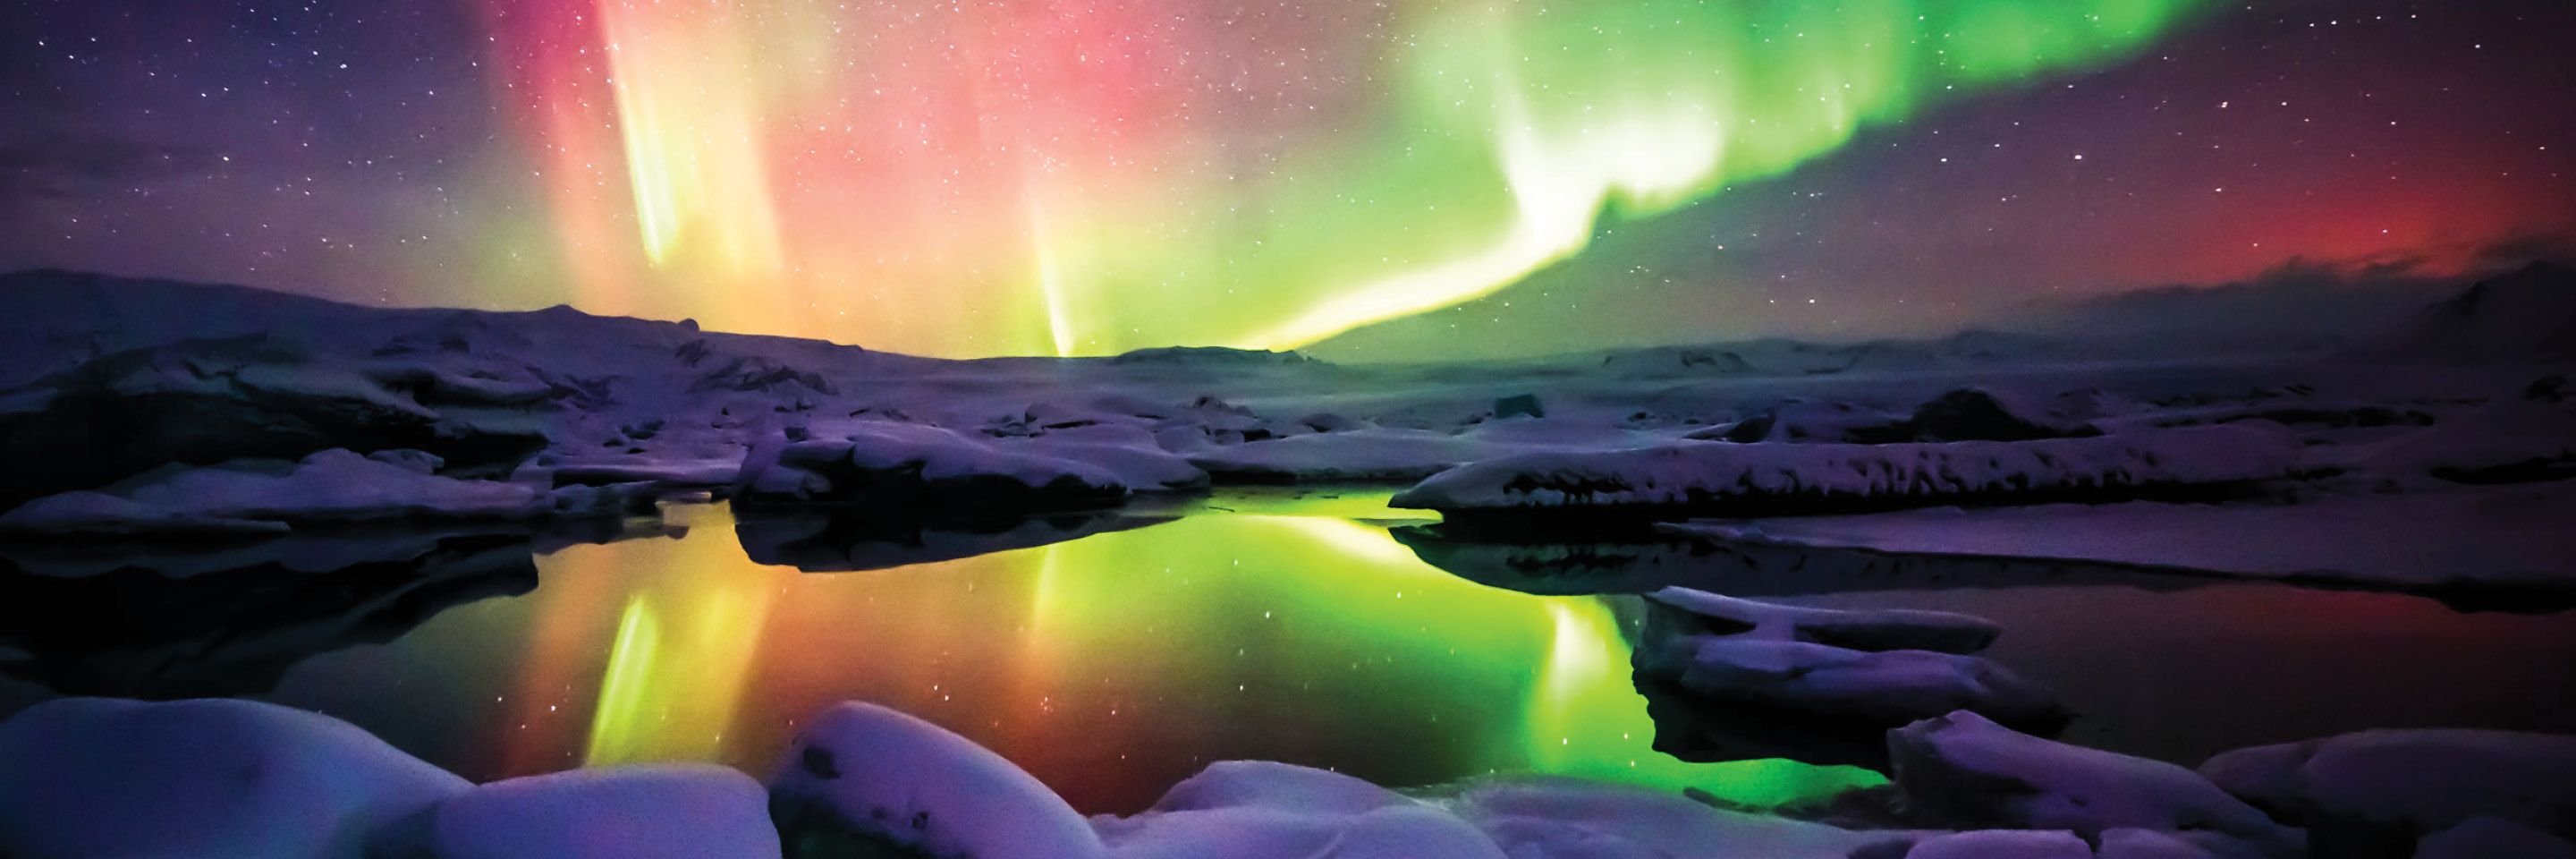 Gems of Iceland with Northern Lights